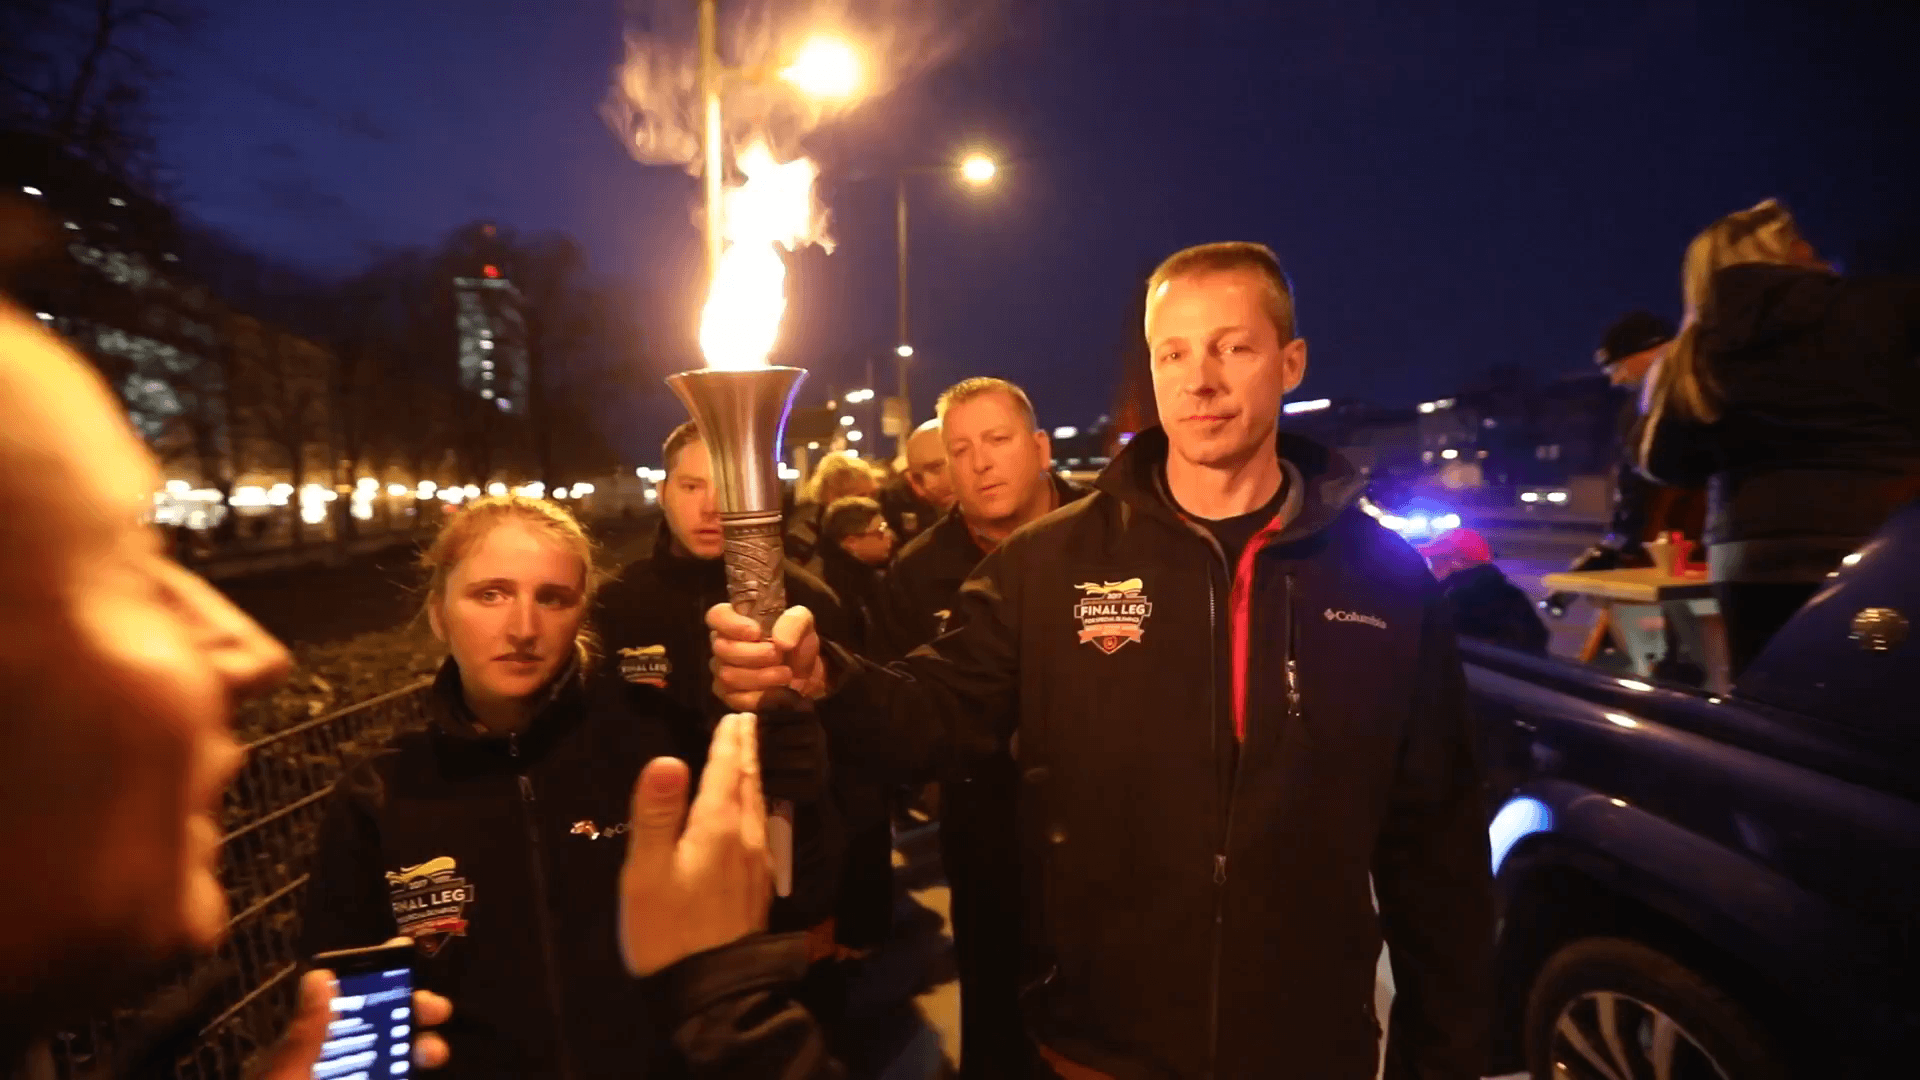 Special Olympics World Winter Games 2017 Torch Run